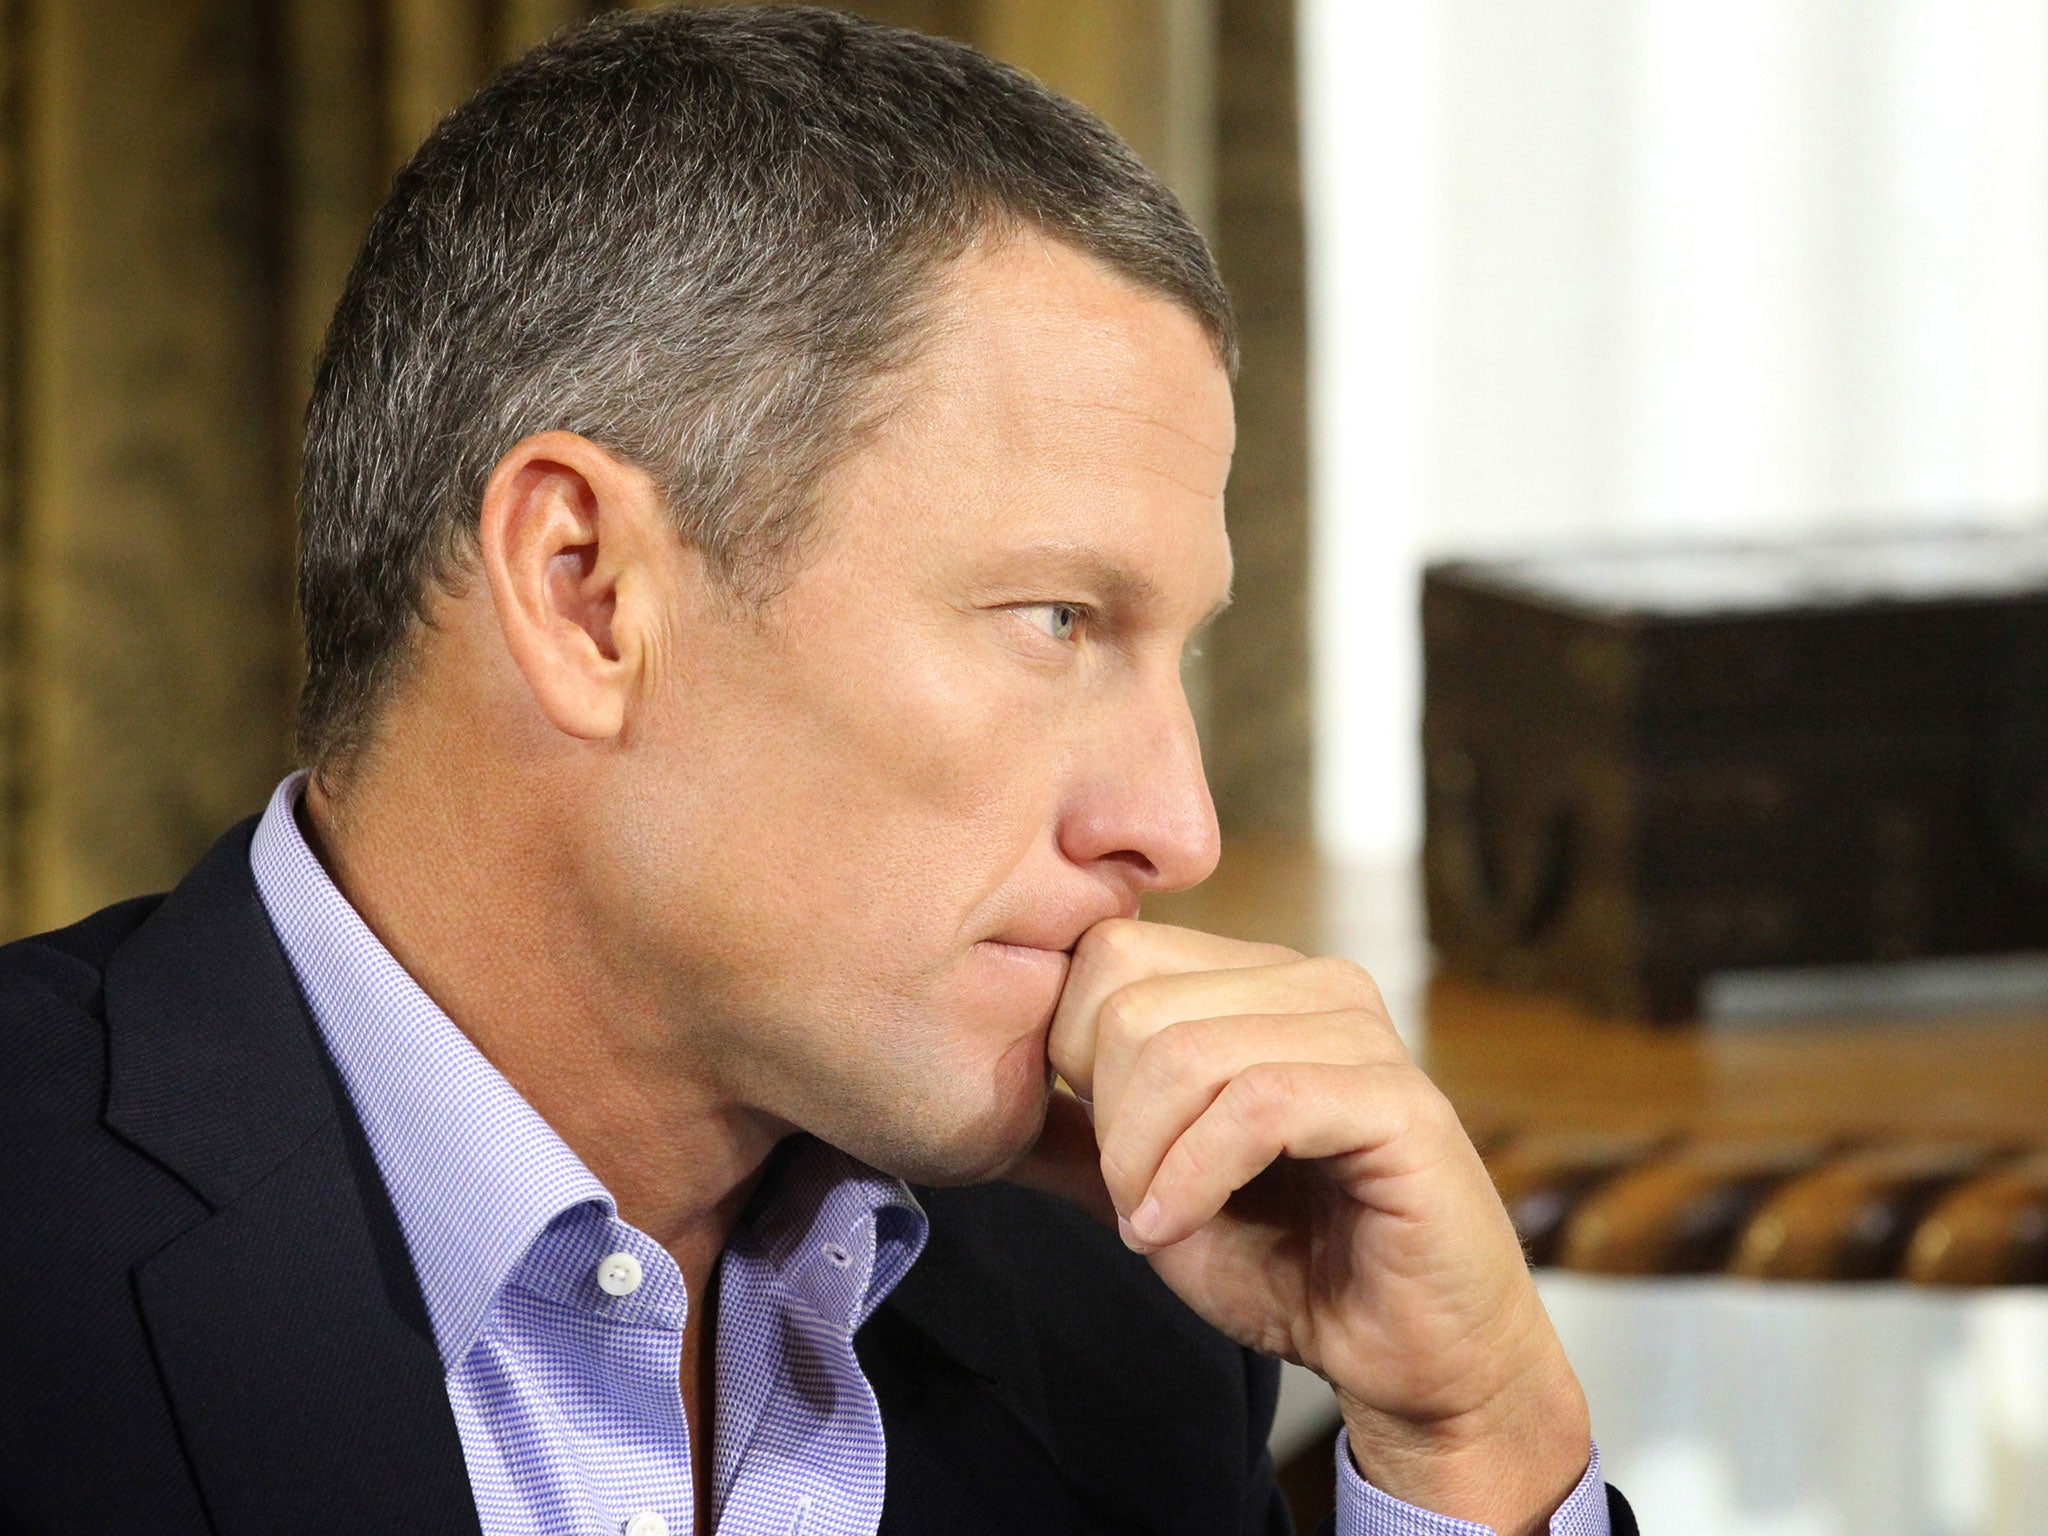 Lance Armstrong pictured during his interview with Oprah Winfrey